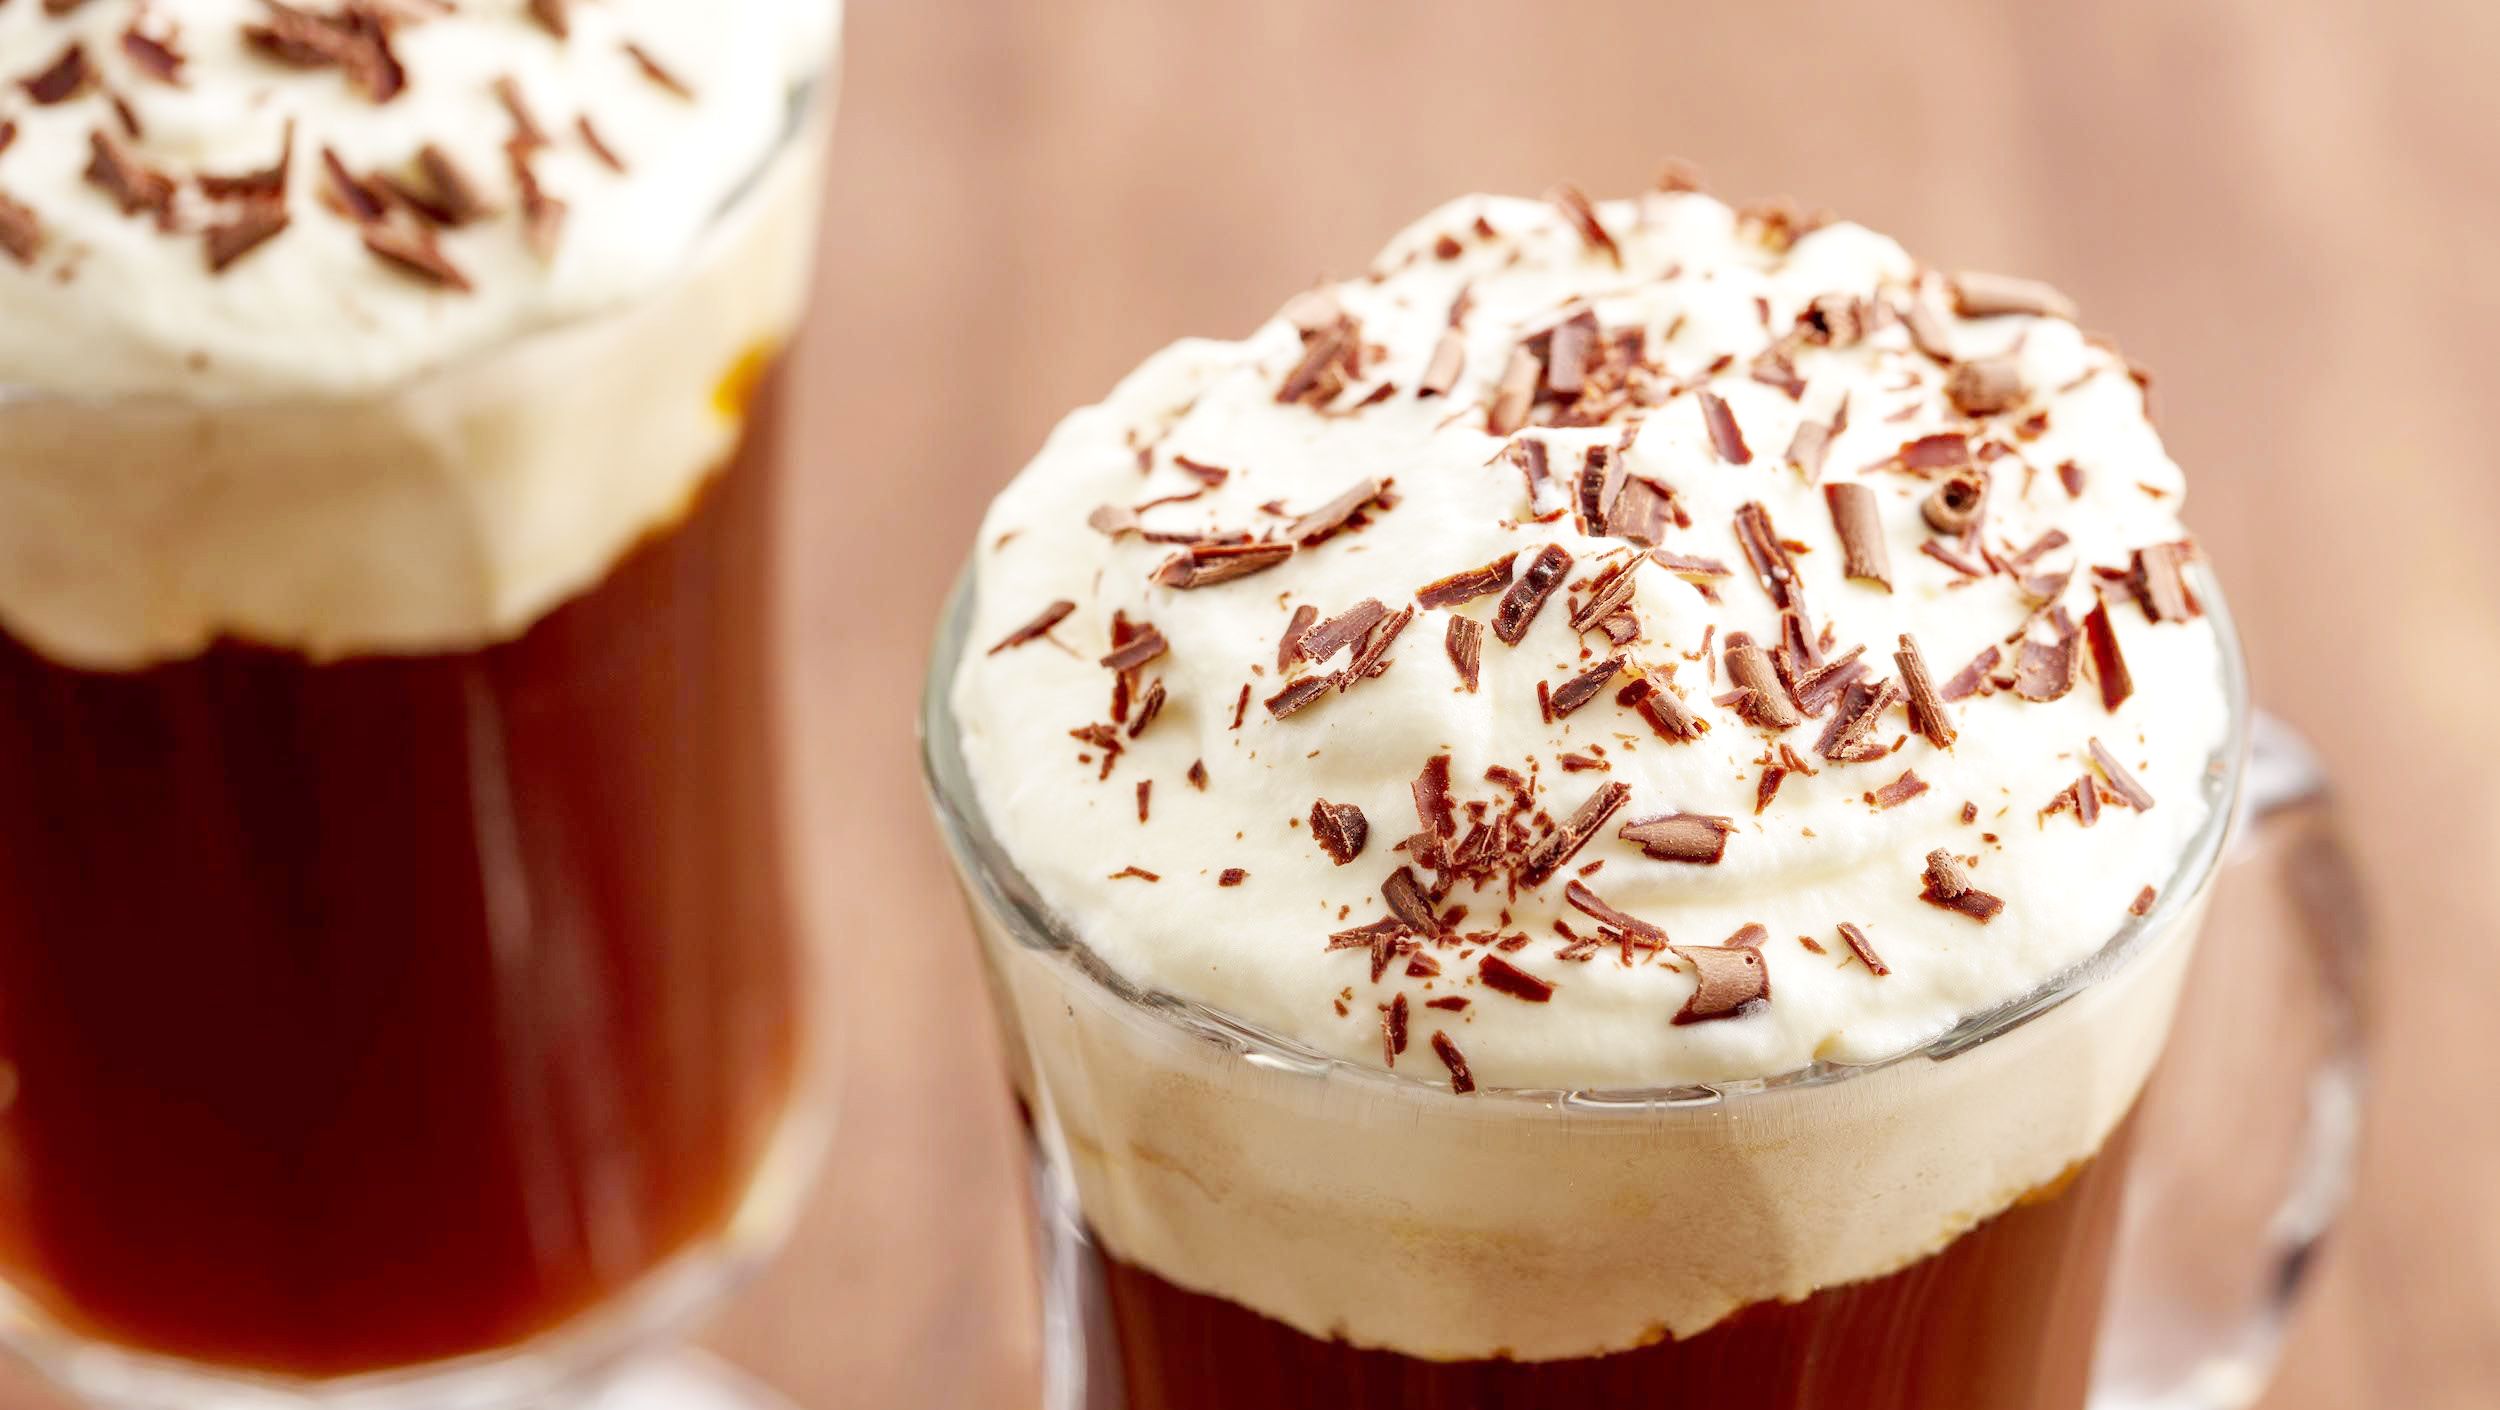 Why Using The Right Type Of Glass Is Important For Irish Coffee